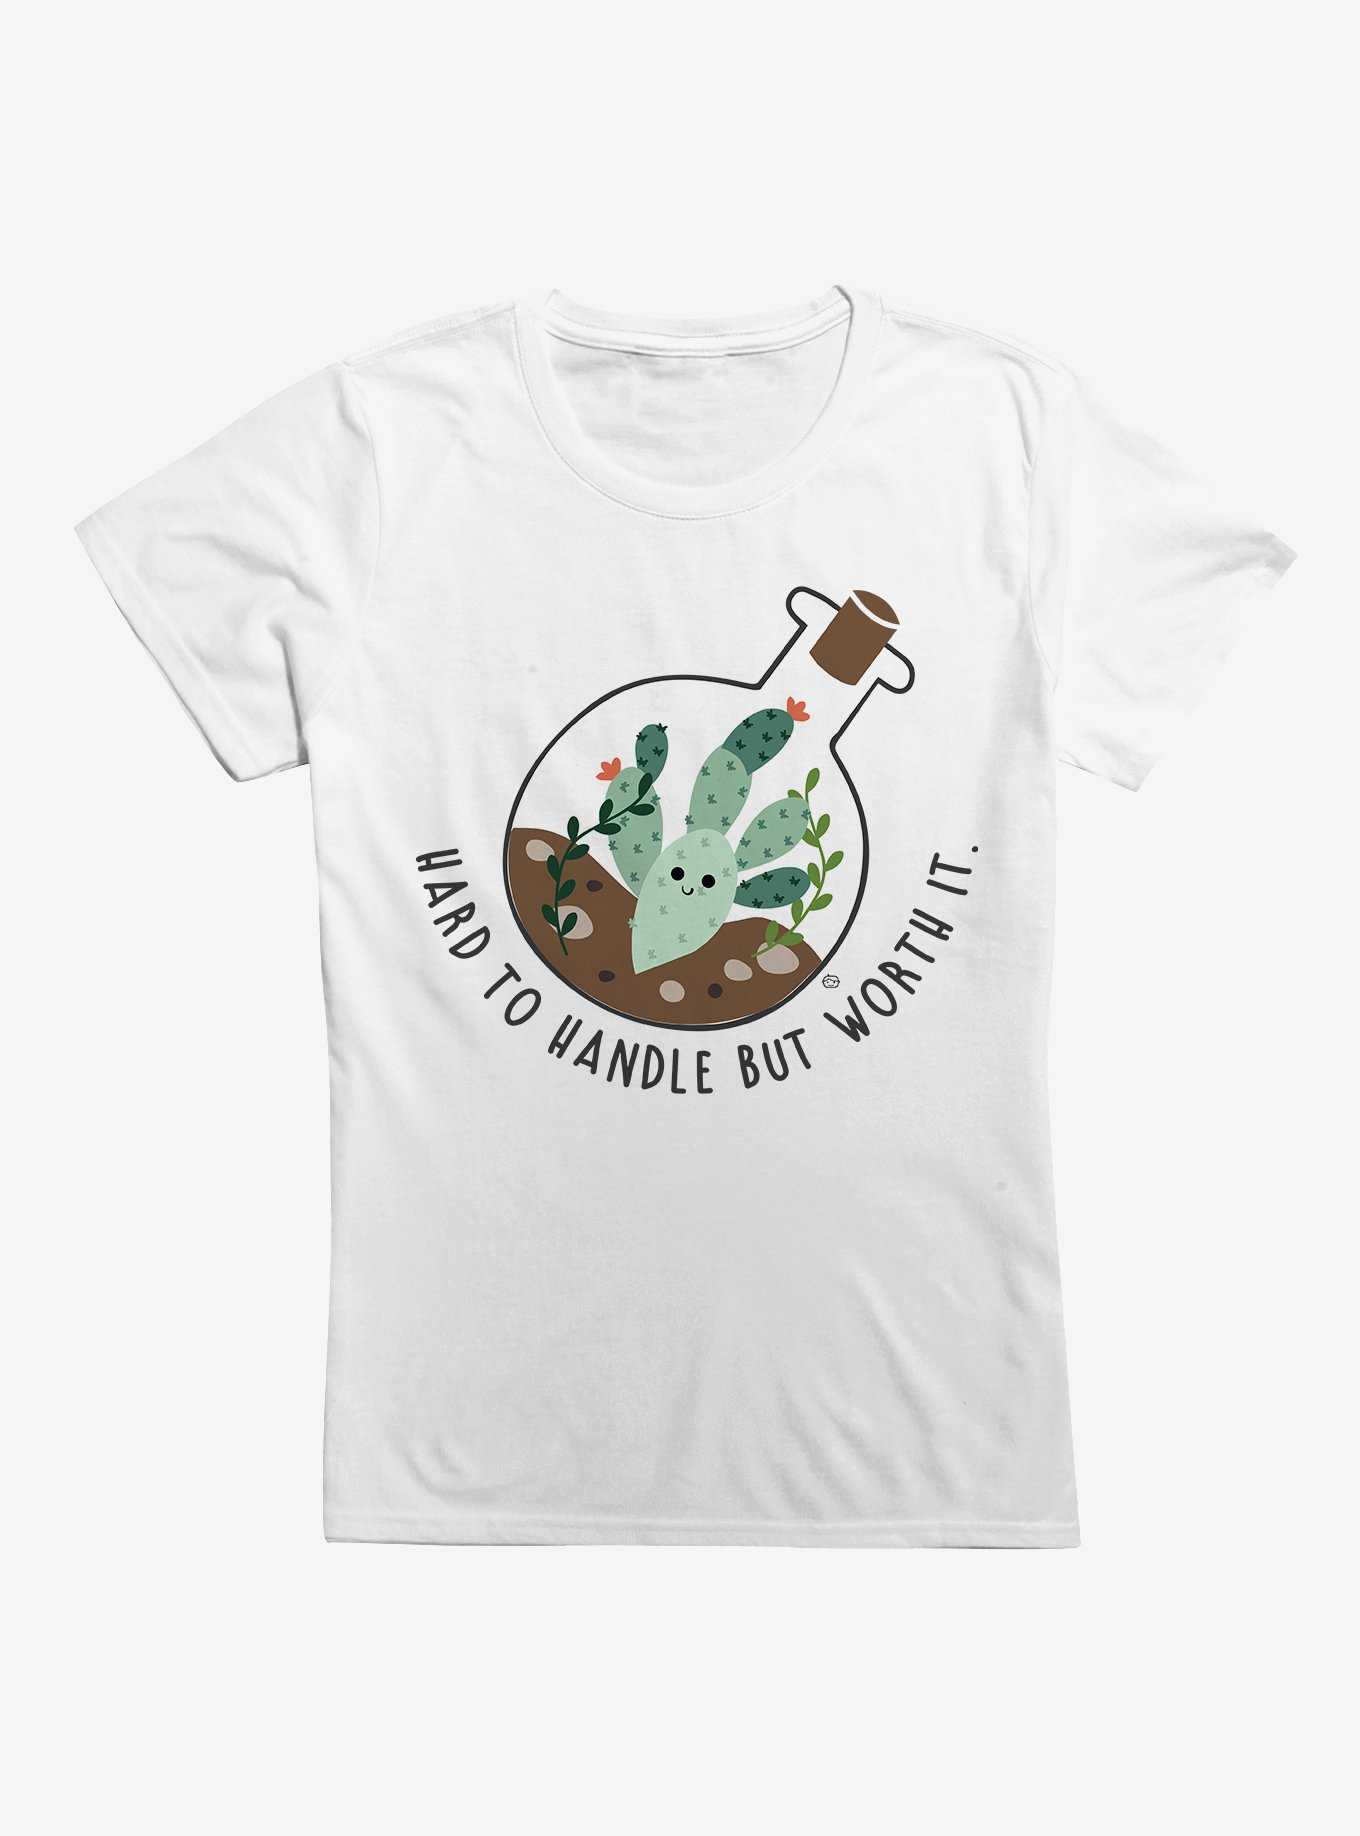 Hard To Handle But Worth It Womens T-Shirt, , hi-res